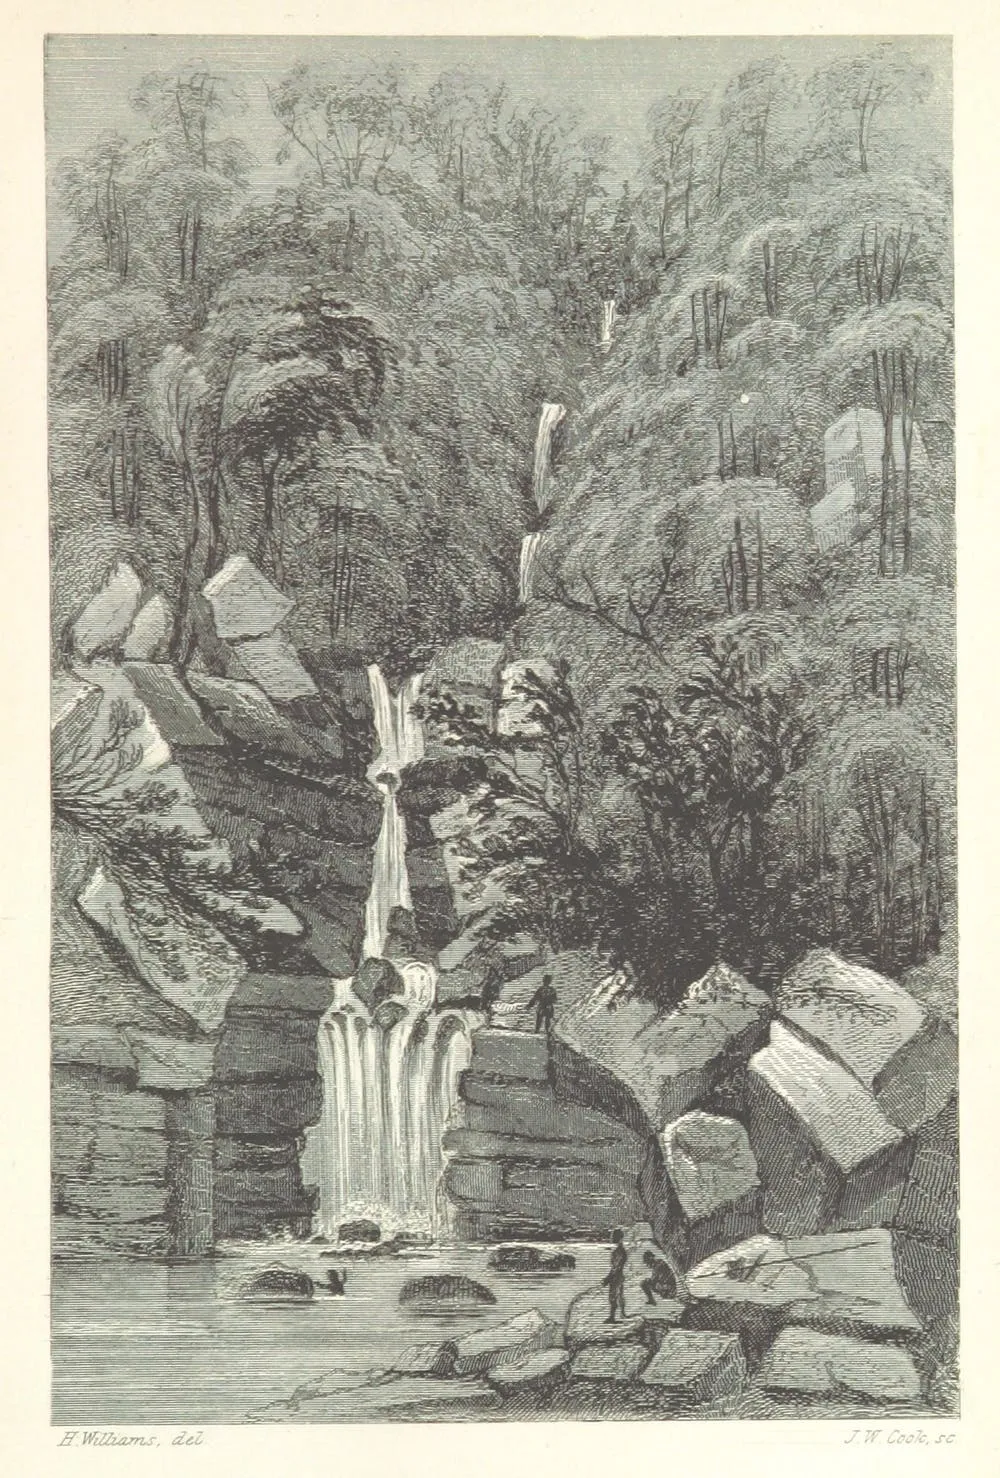 A waterfall in Sarawak.  Hugh Low, 'Sarawak; its inhabitants and productions; being notes during a residence in that country with the Rajah Brooke.'